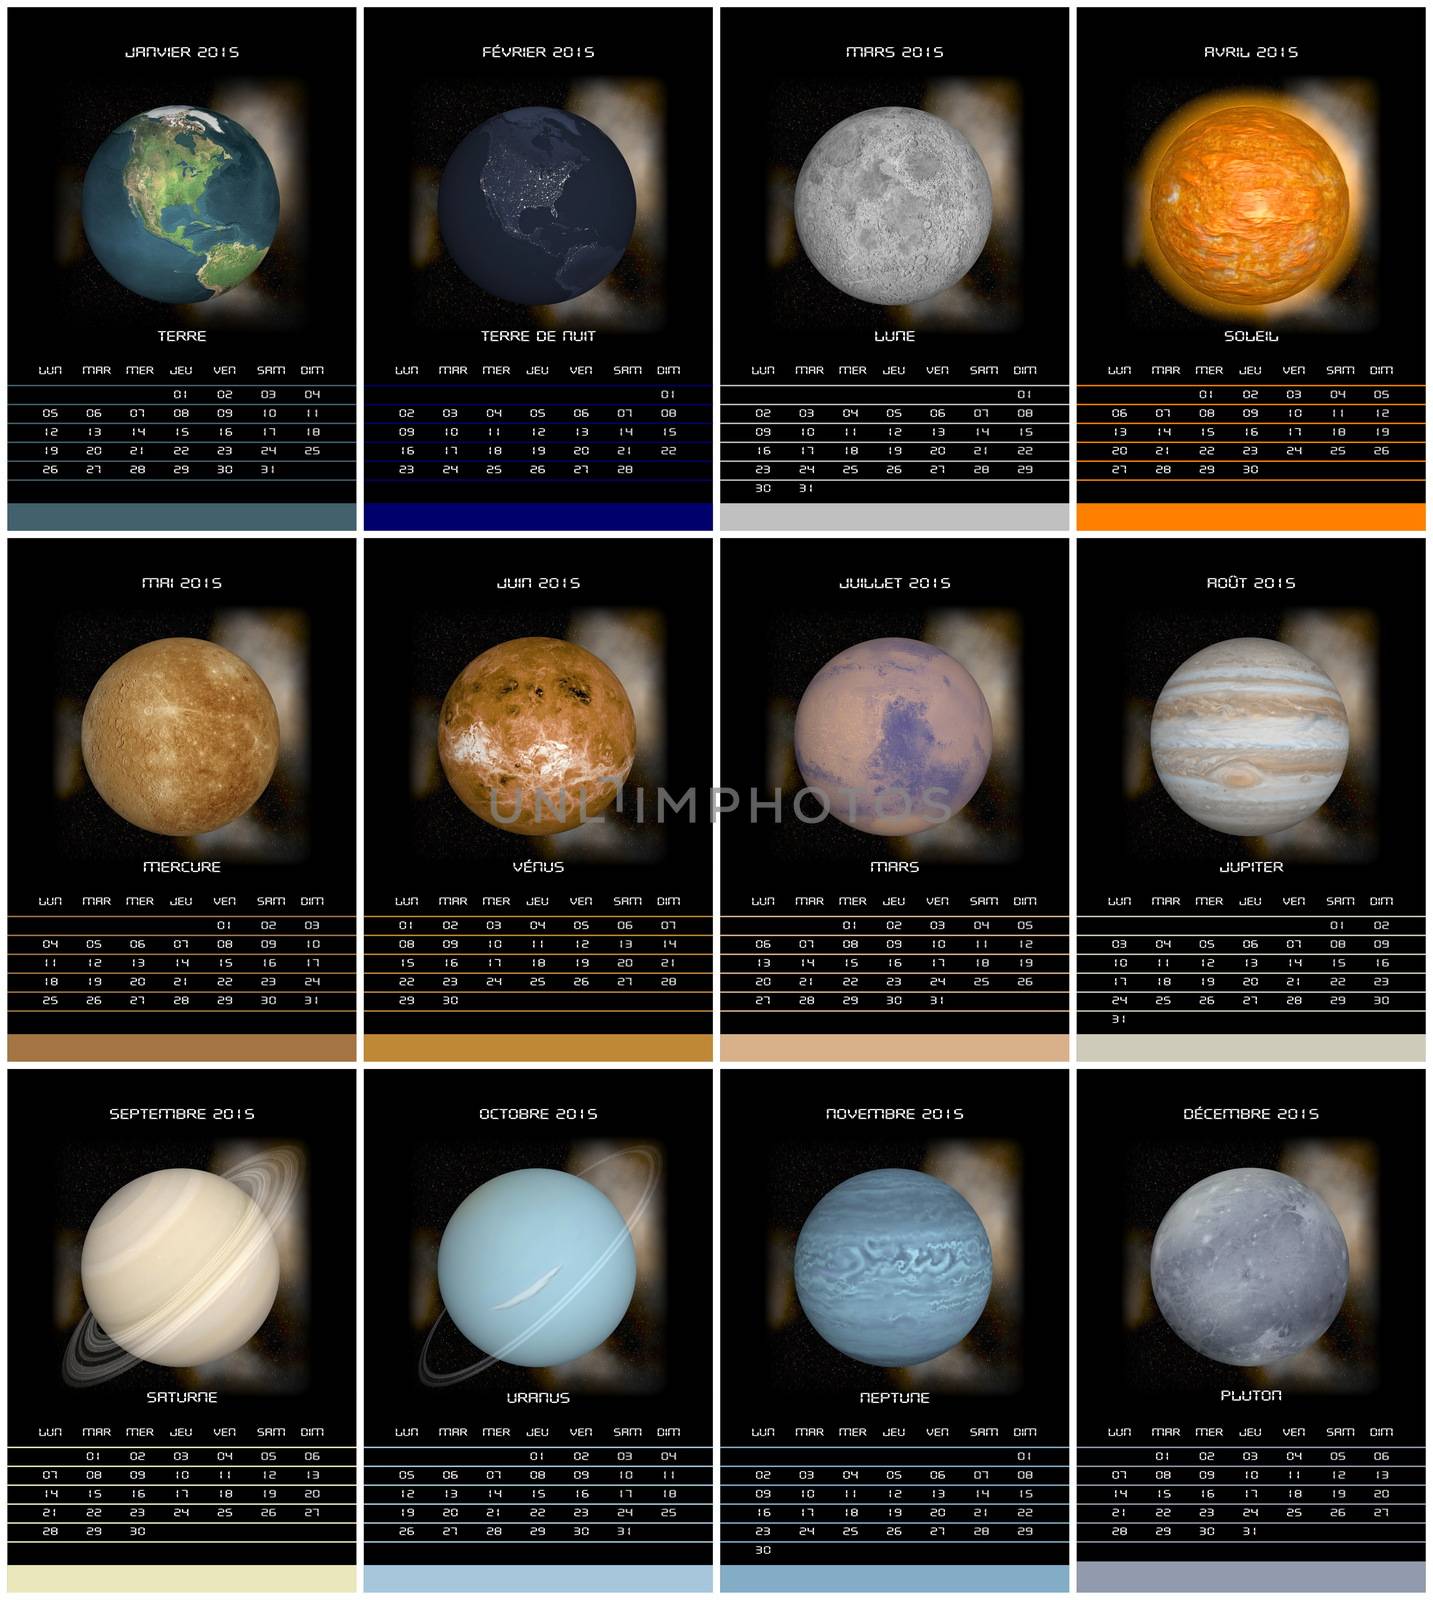 European french 2015 year calendar with solar system planets by Elenaphotos21